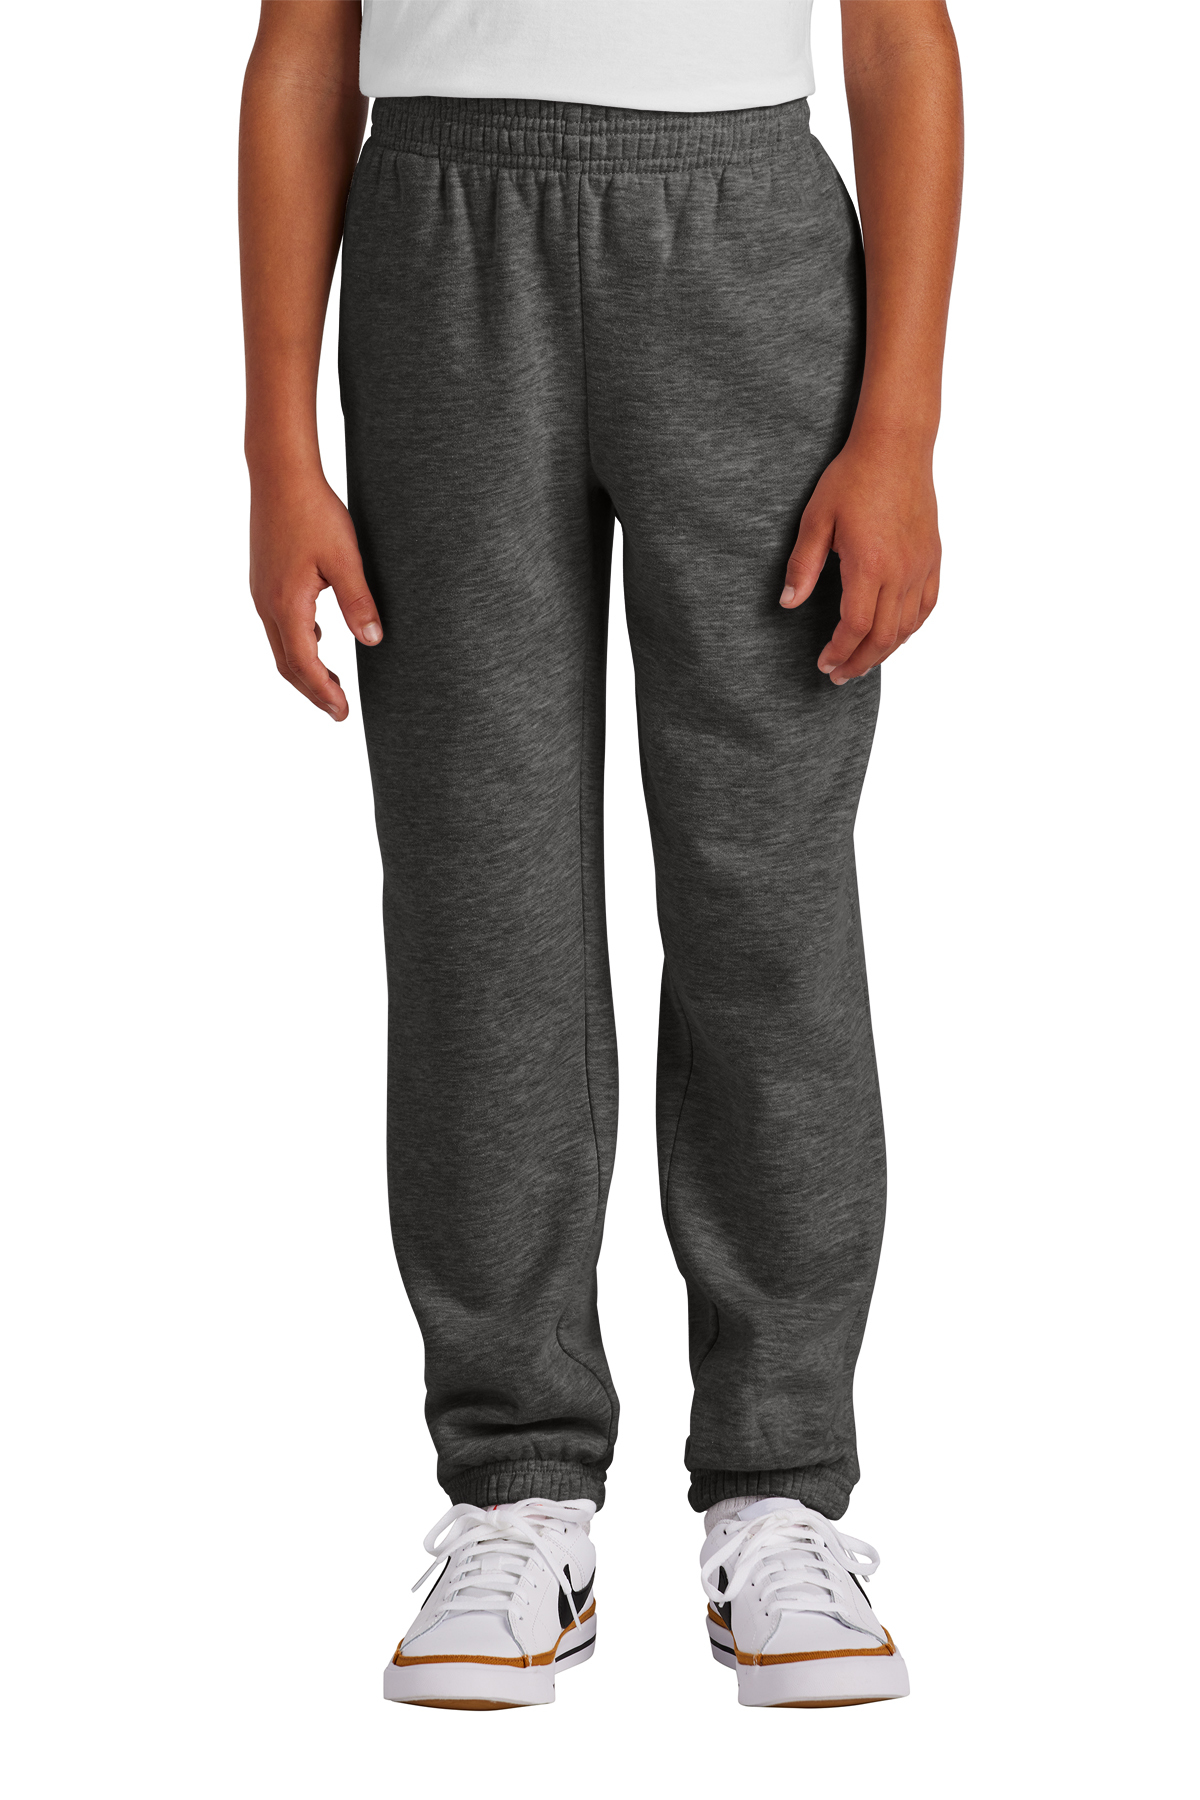 District Youth V.I.T. Fleece Sweatpant | Product | SanMar